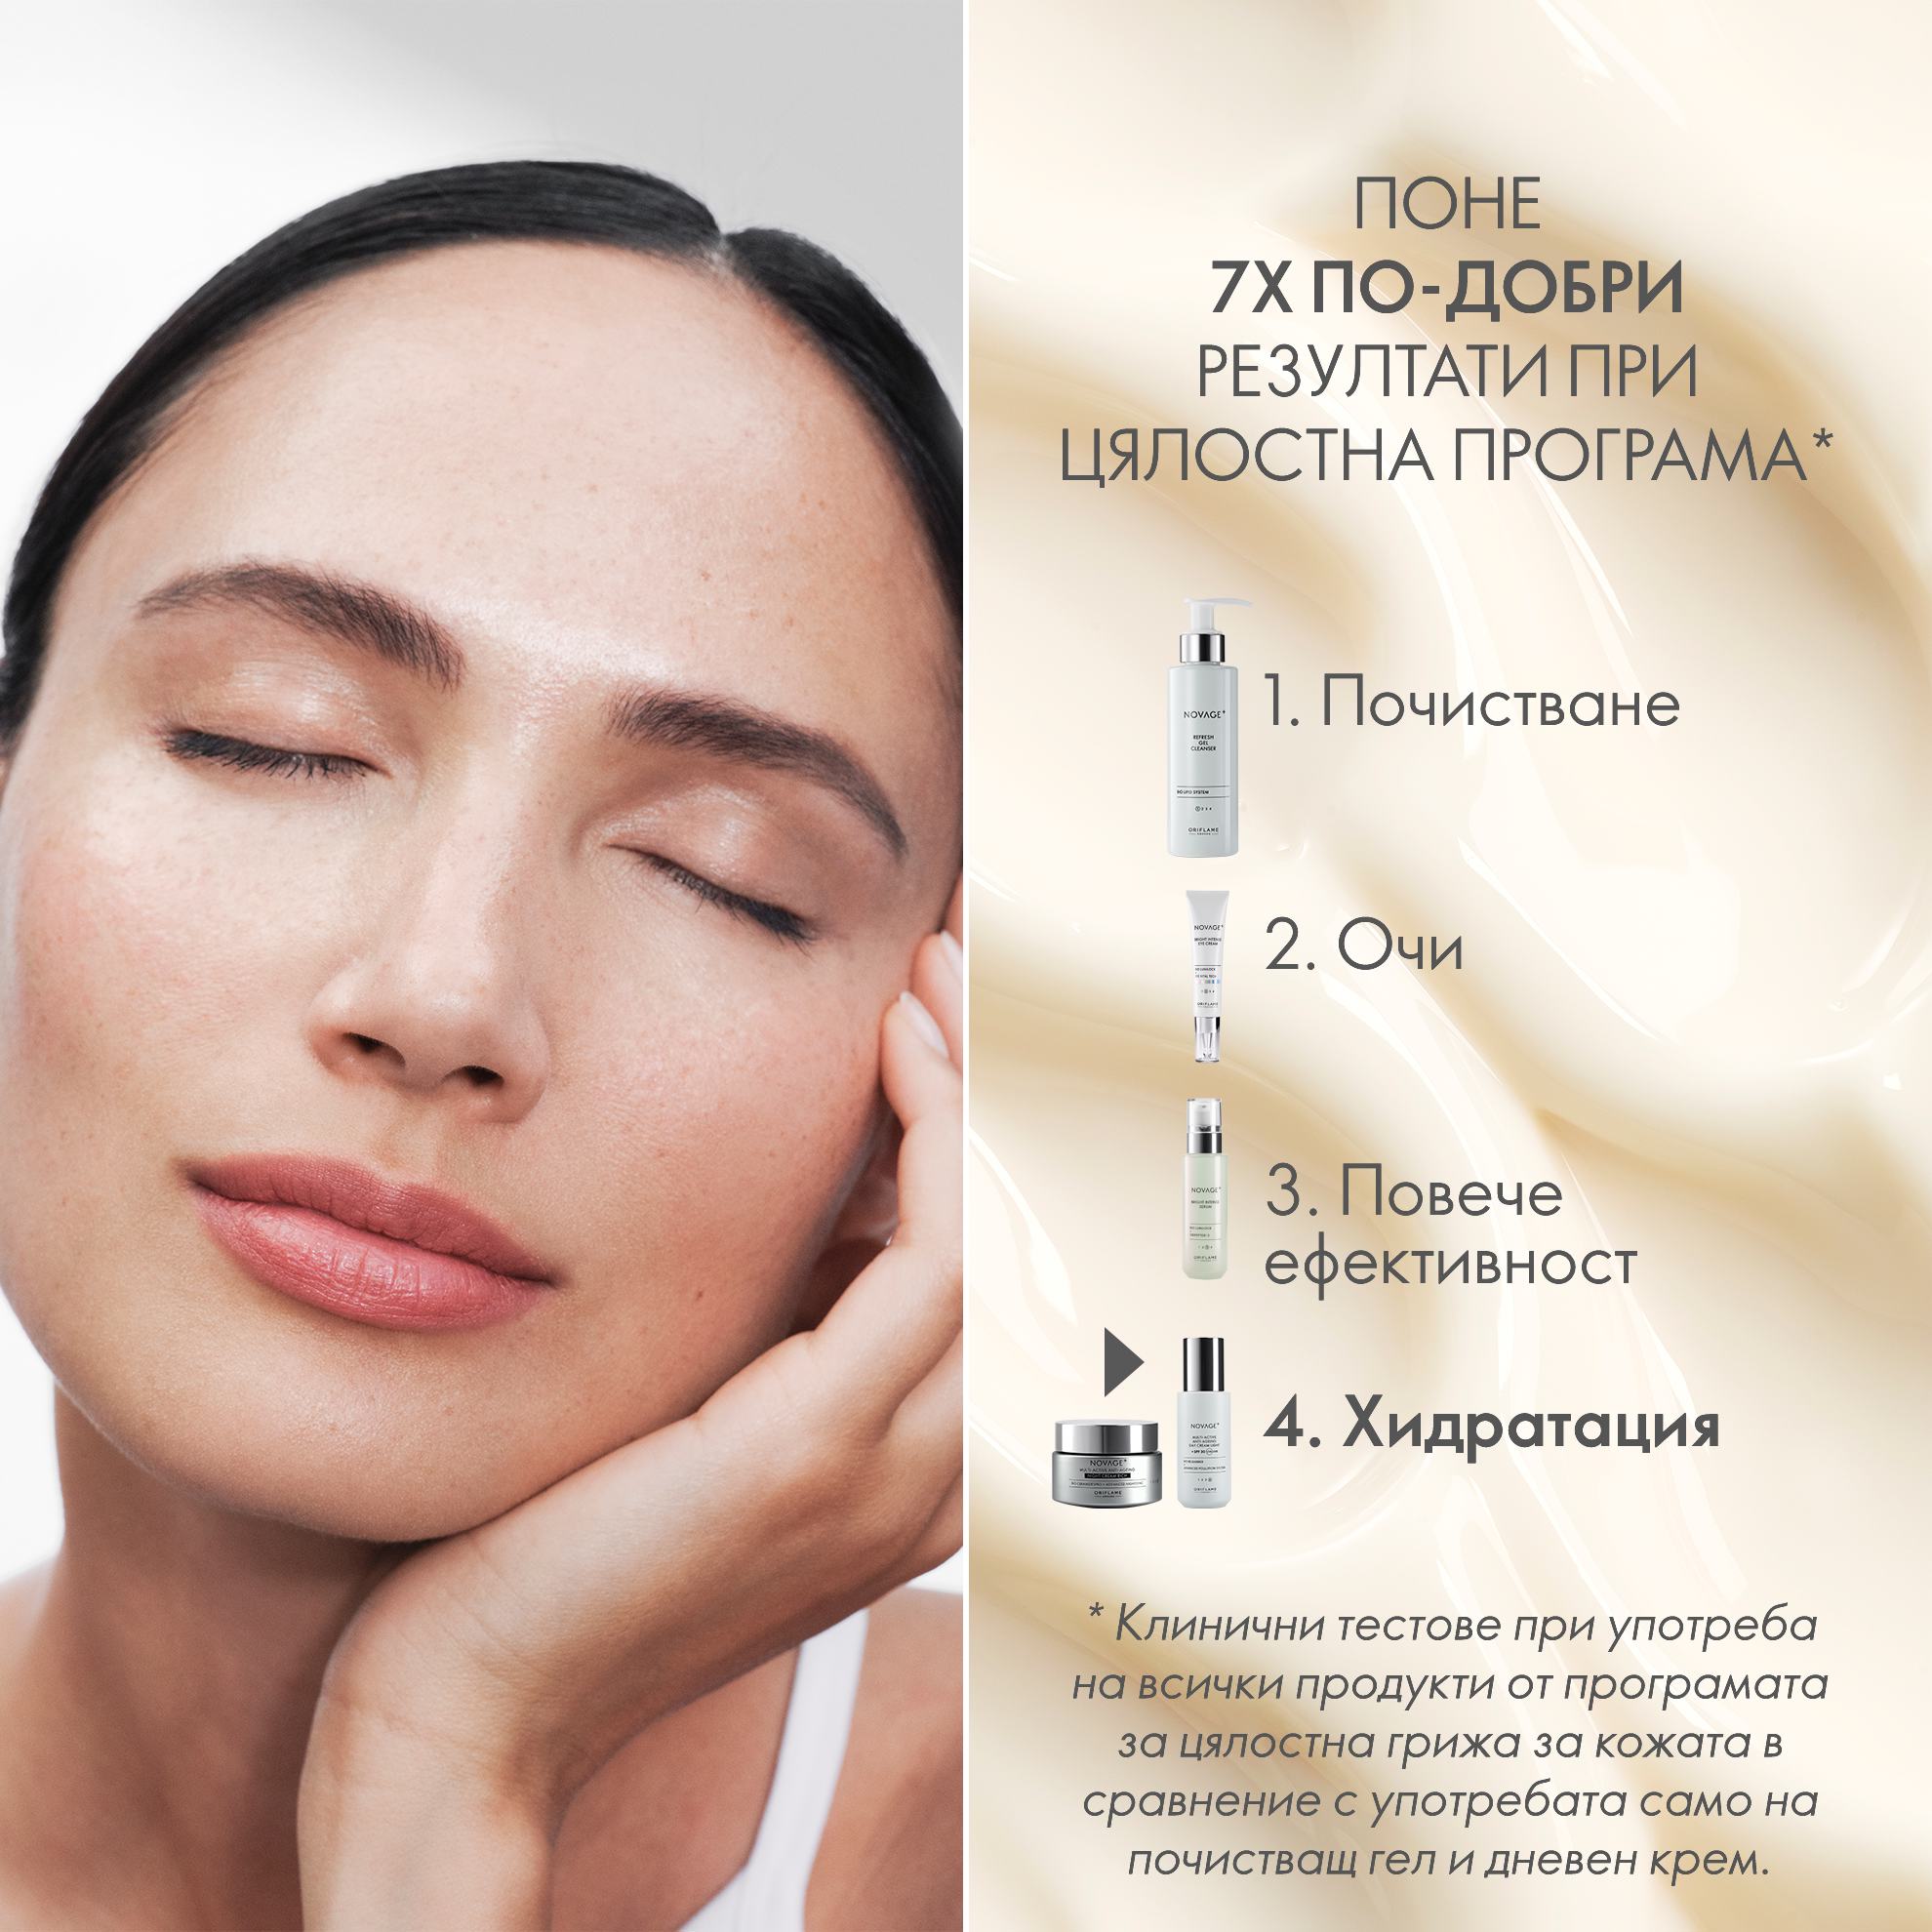 https://media-cdn.oriflame.com/productImage?externalMediaId=product-management-media%2fProducts%2f41043%2fBG%2f41043_5.png&id=17554922&version=1